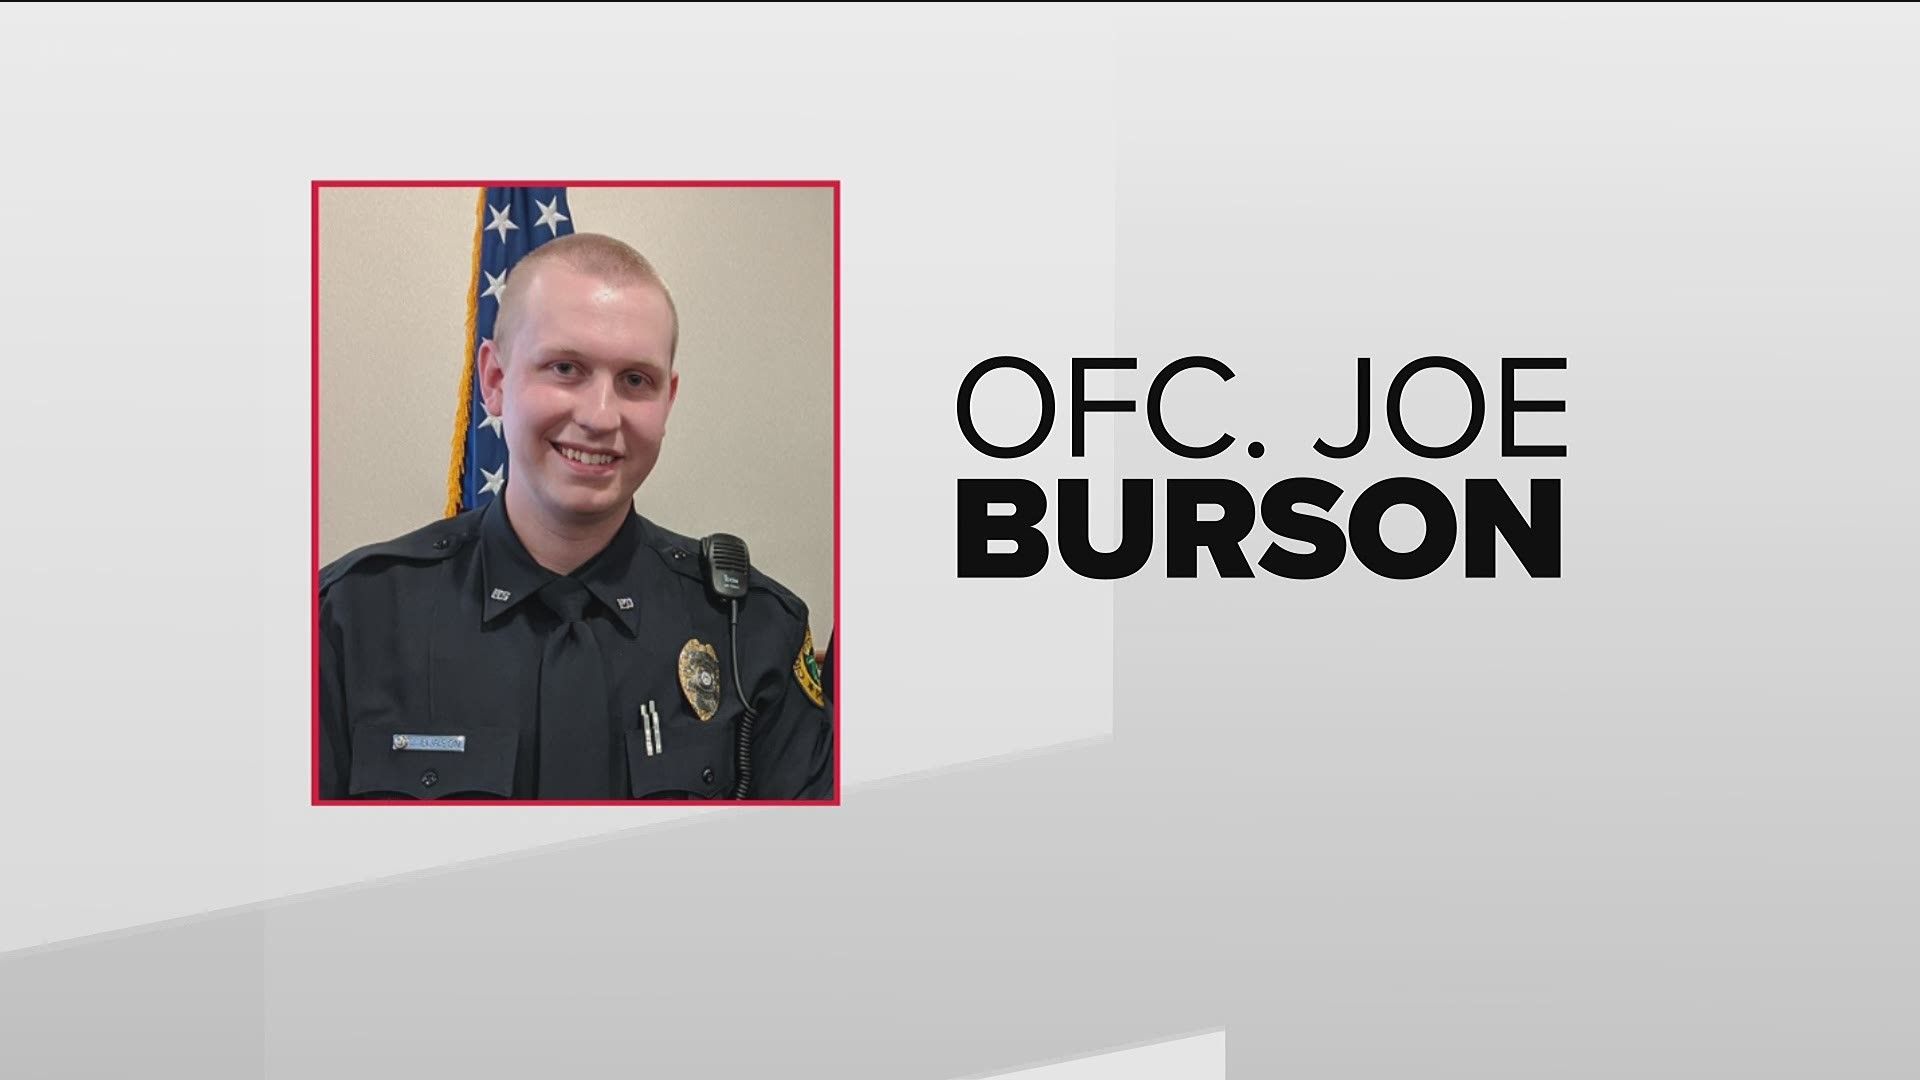 Holly Springs Police Chief Tommy Keheley called the officer, Joe Burson, a 'model officer' as well.